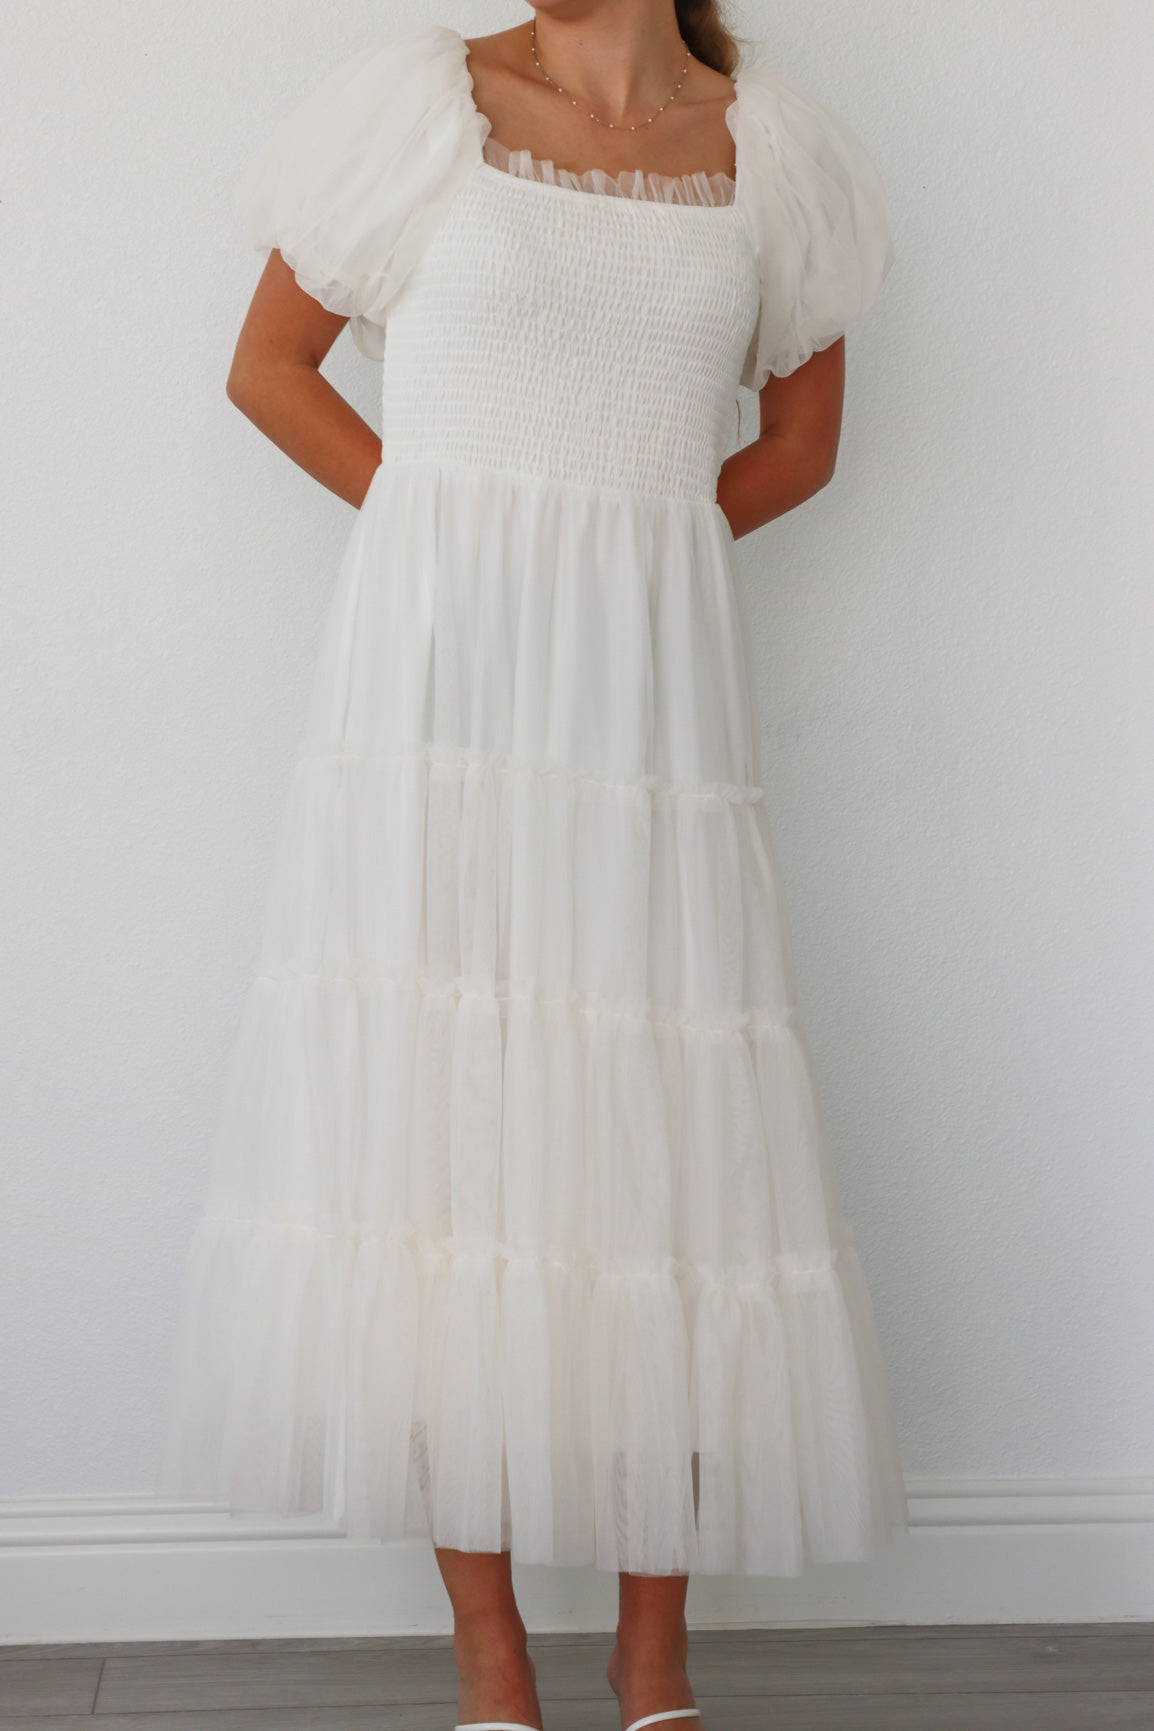 girl wearing long white dress with tulle detailing